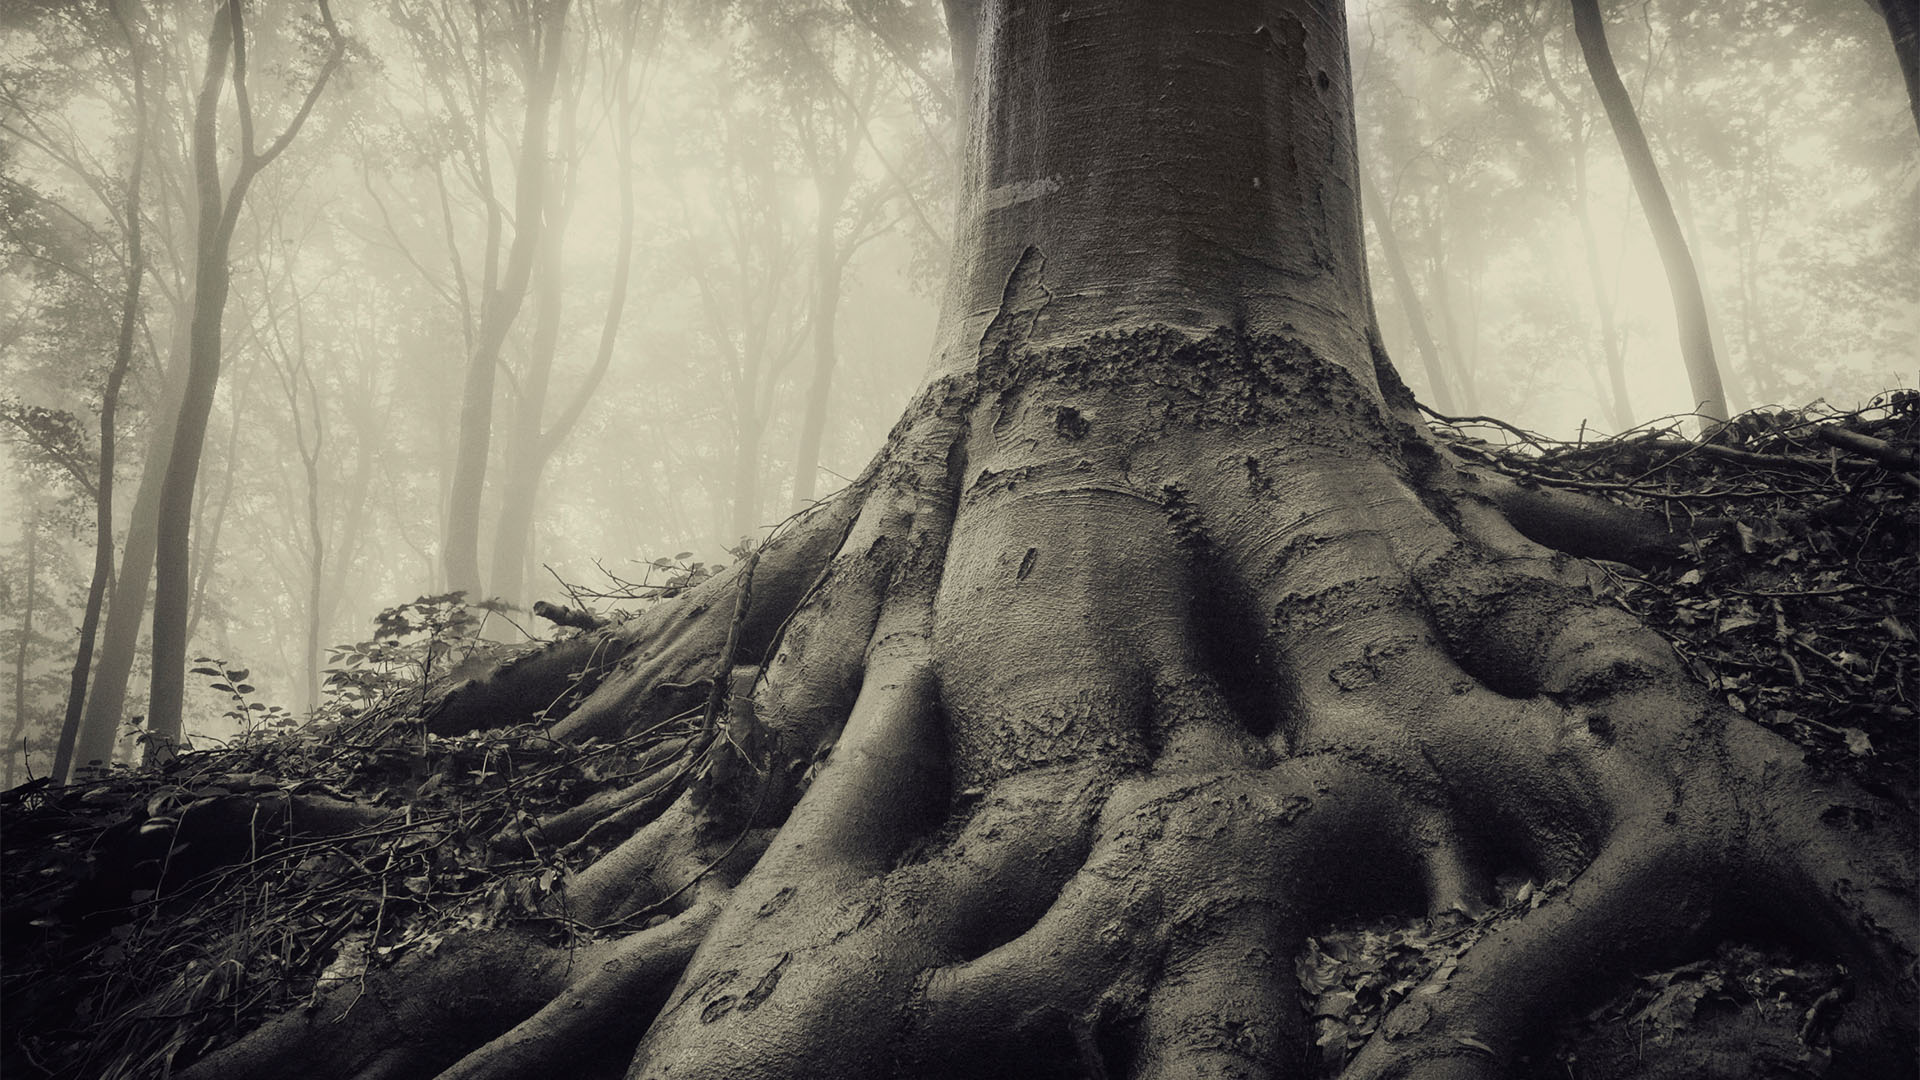 Old tree roots in a dark forest on a rainy day